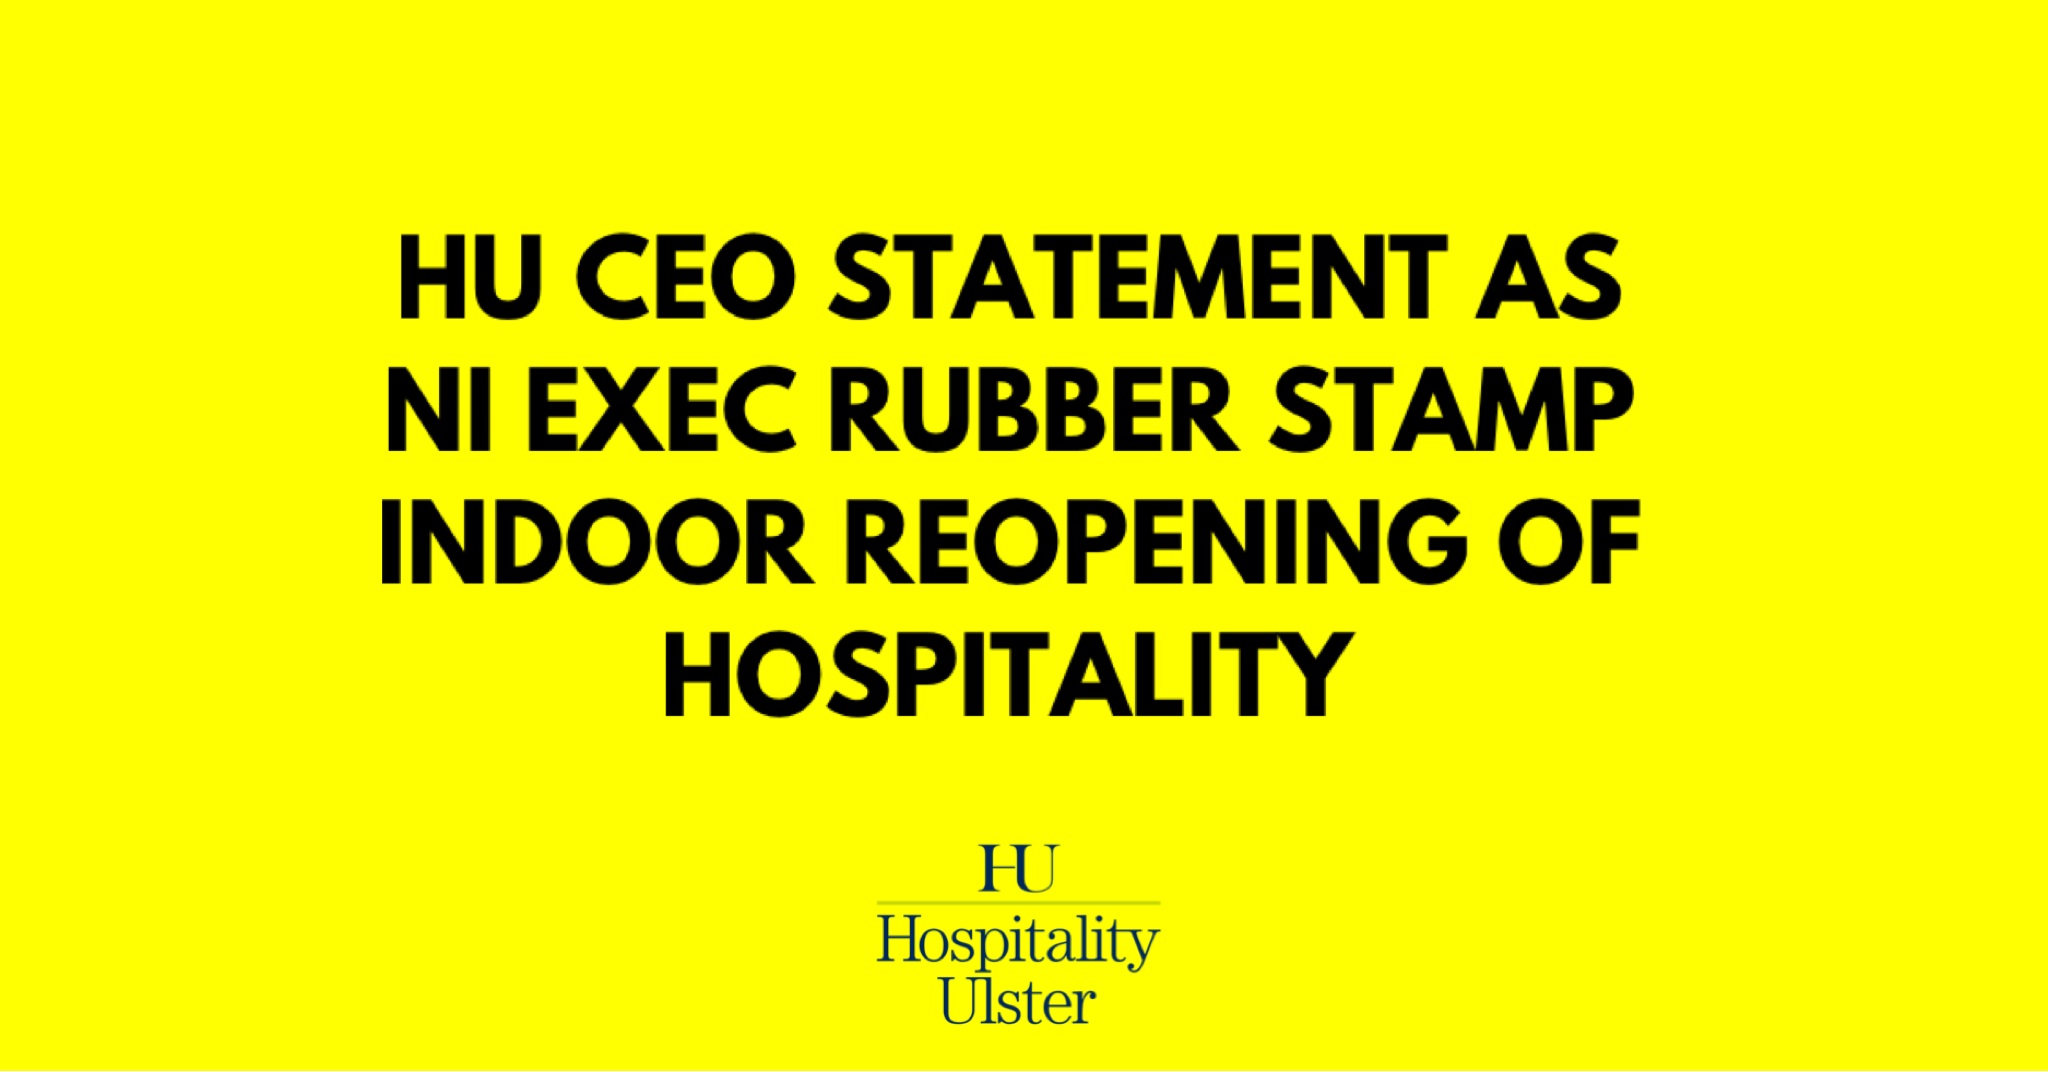 CEO STATEMENT AS NI EXEC RUBBER STAMP INDOOR REOPENING OF HOSPITALITY